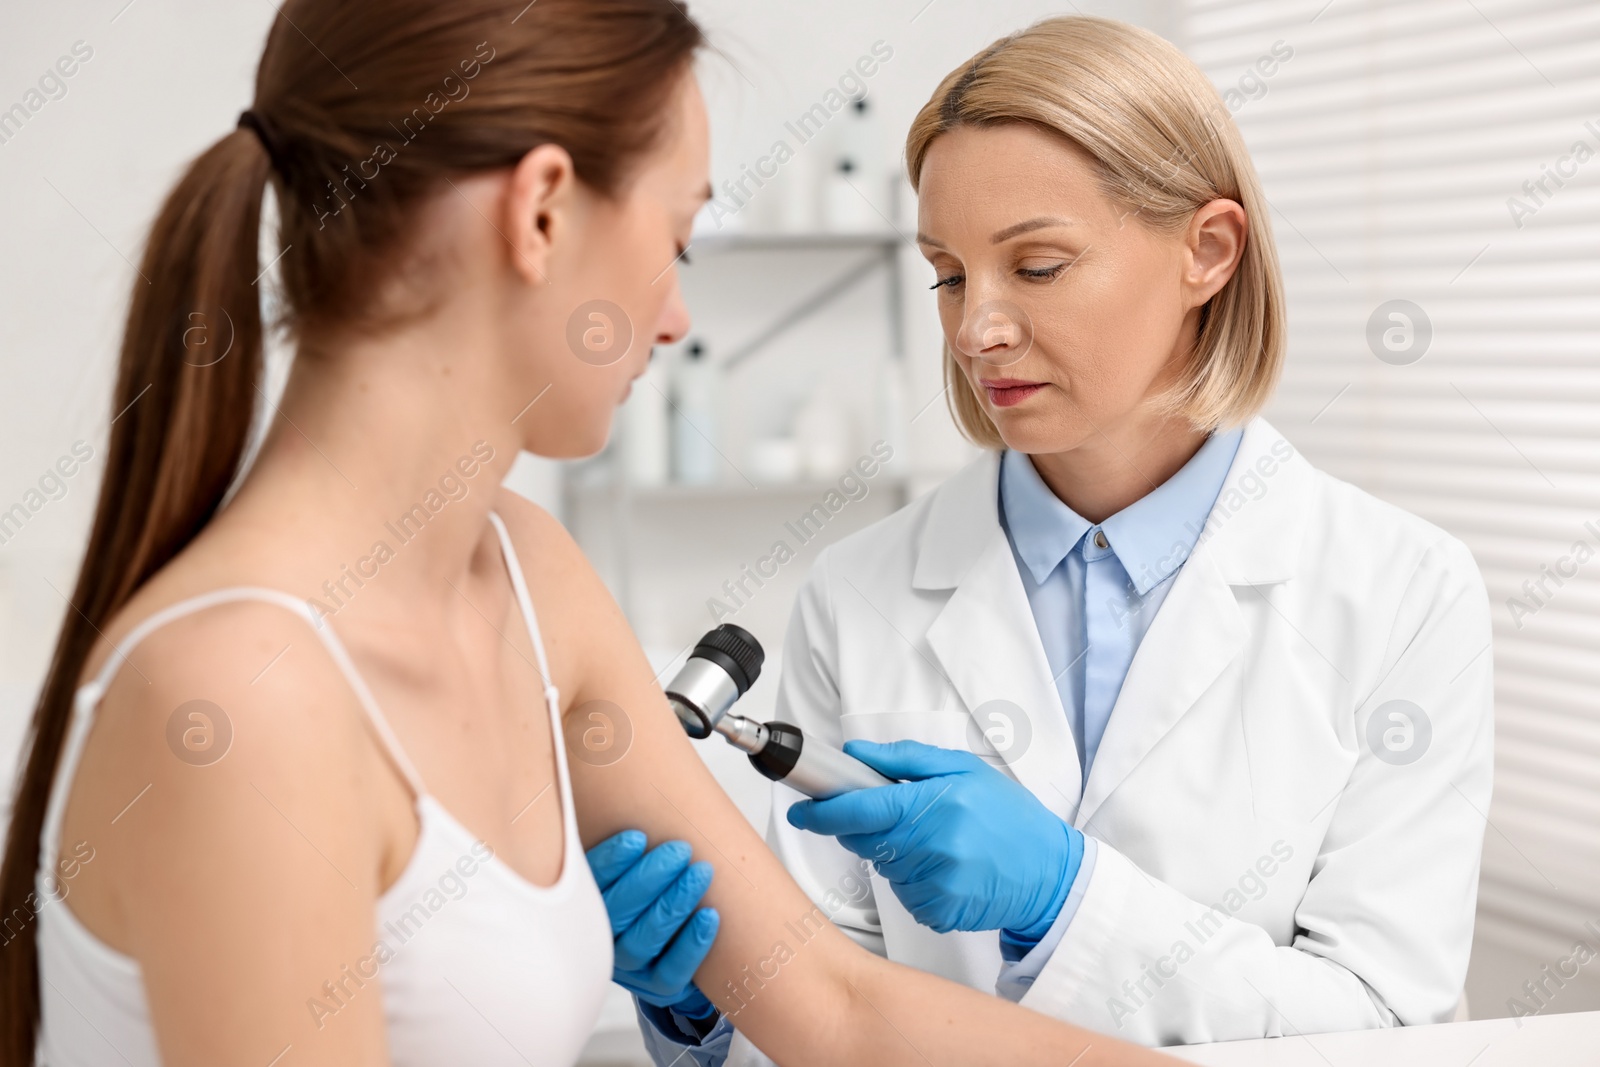 Photo of Dermatologist with dermatoscope examining patient in clinic